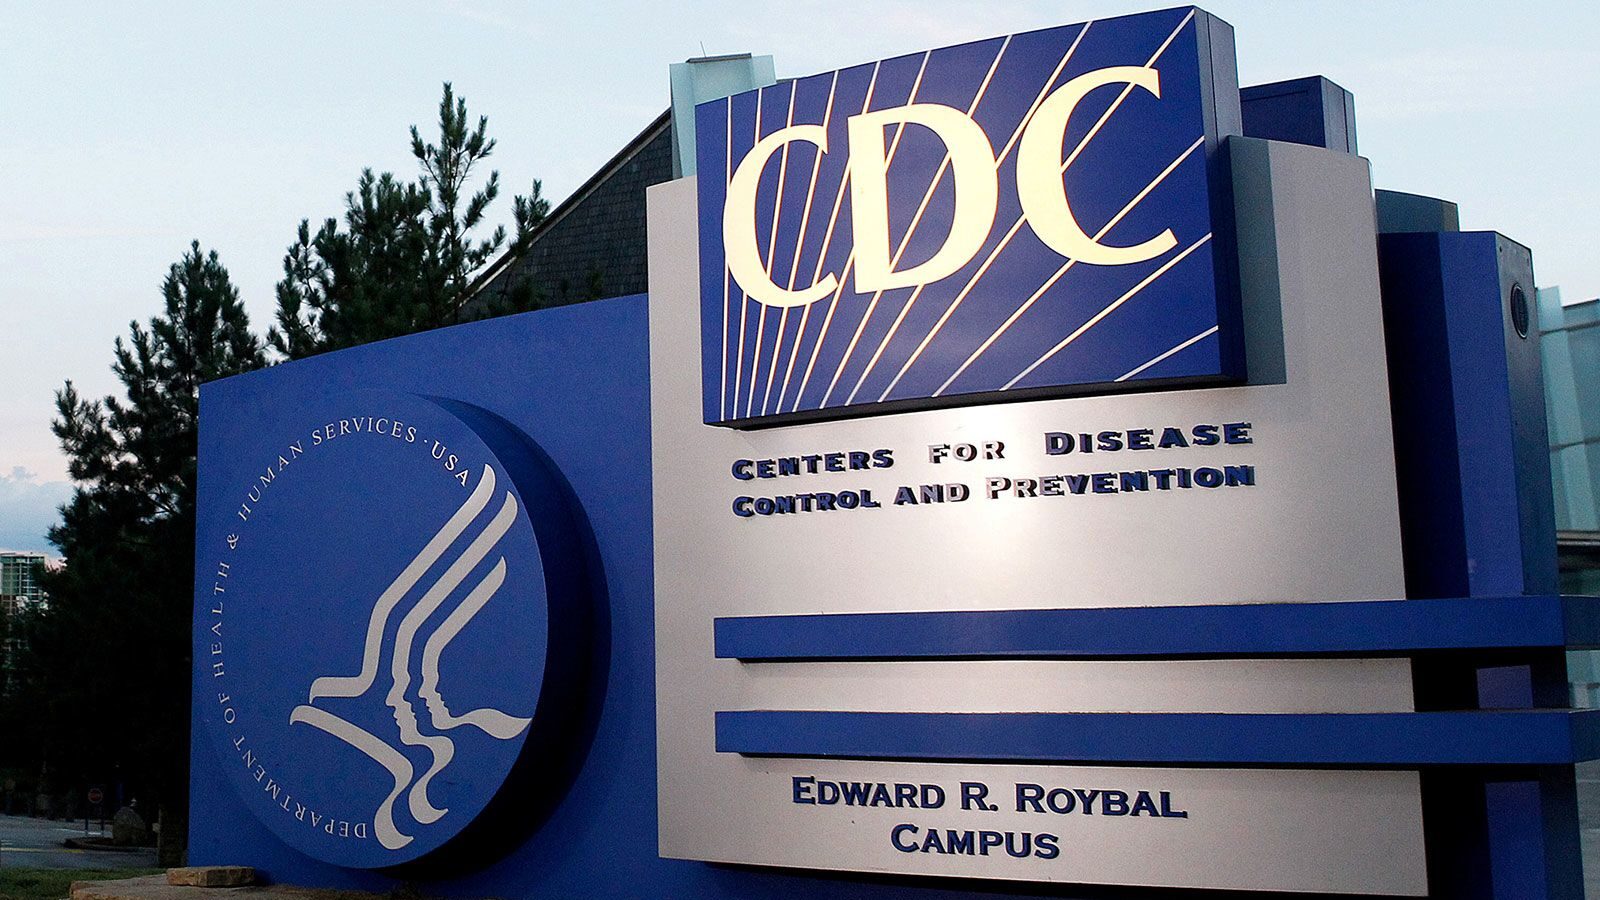 cdc sign shown, the agency is rumored to be changing covid guidelines...